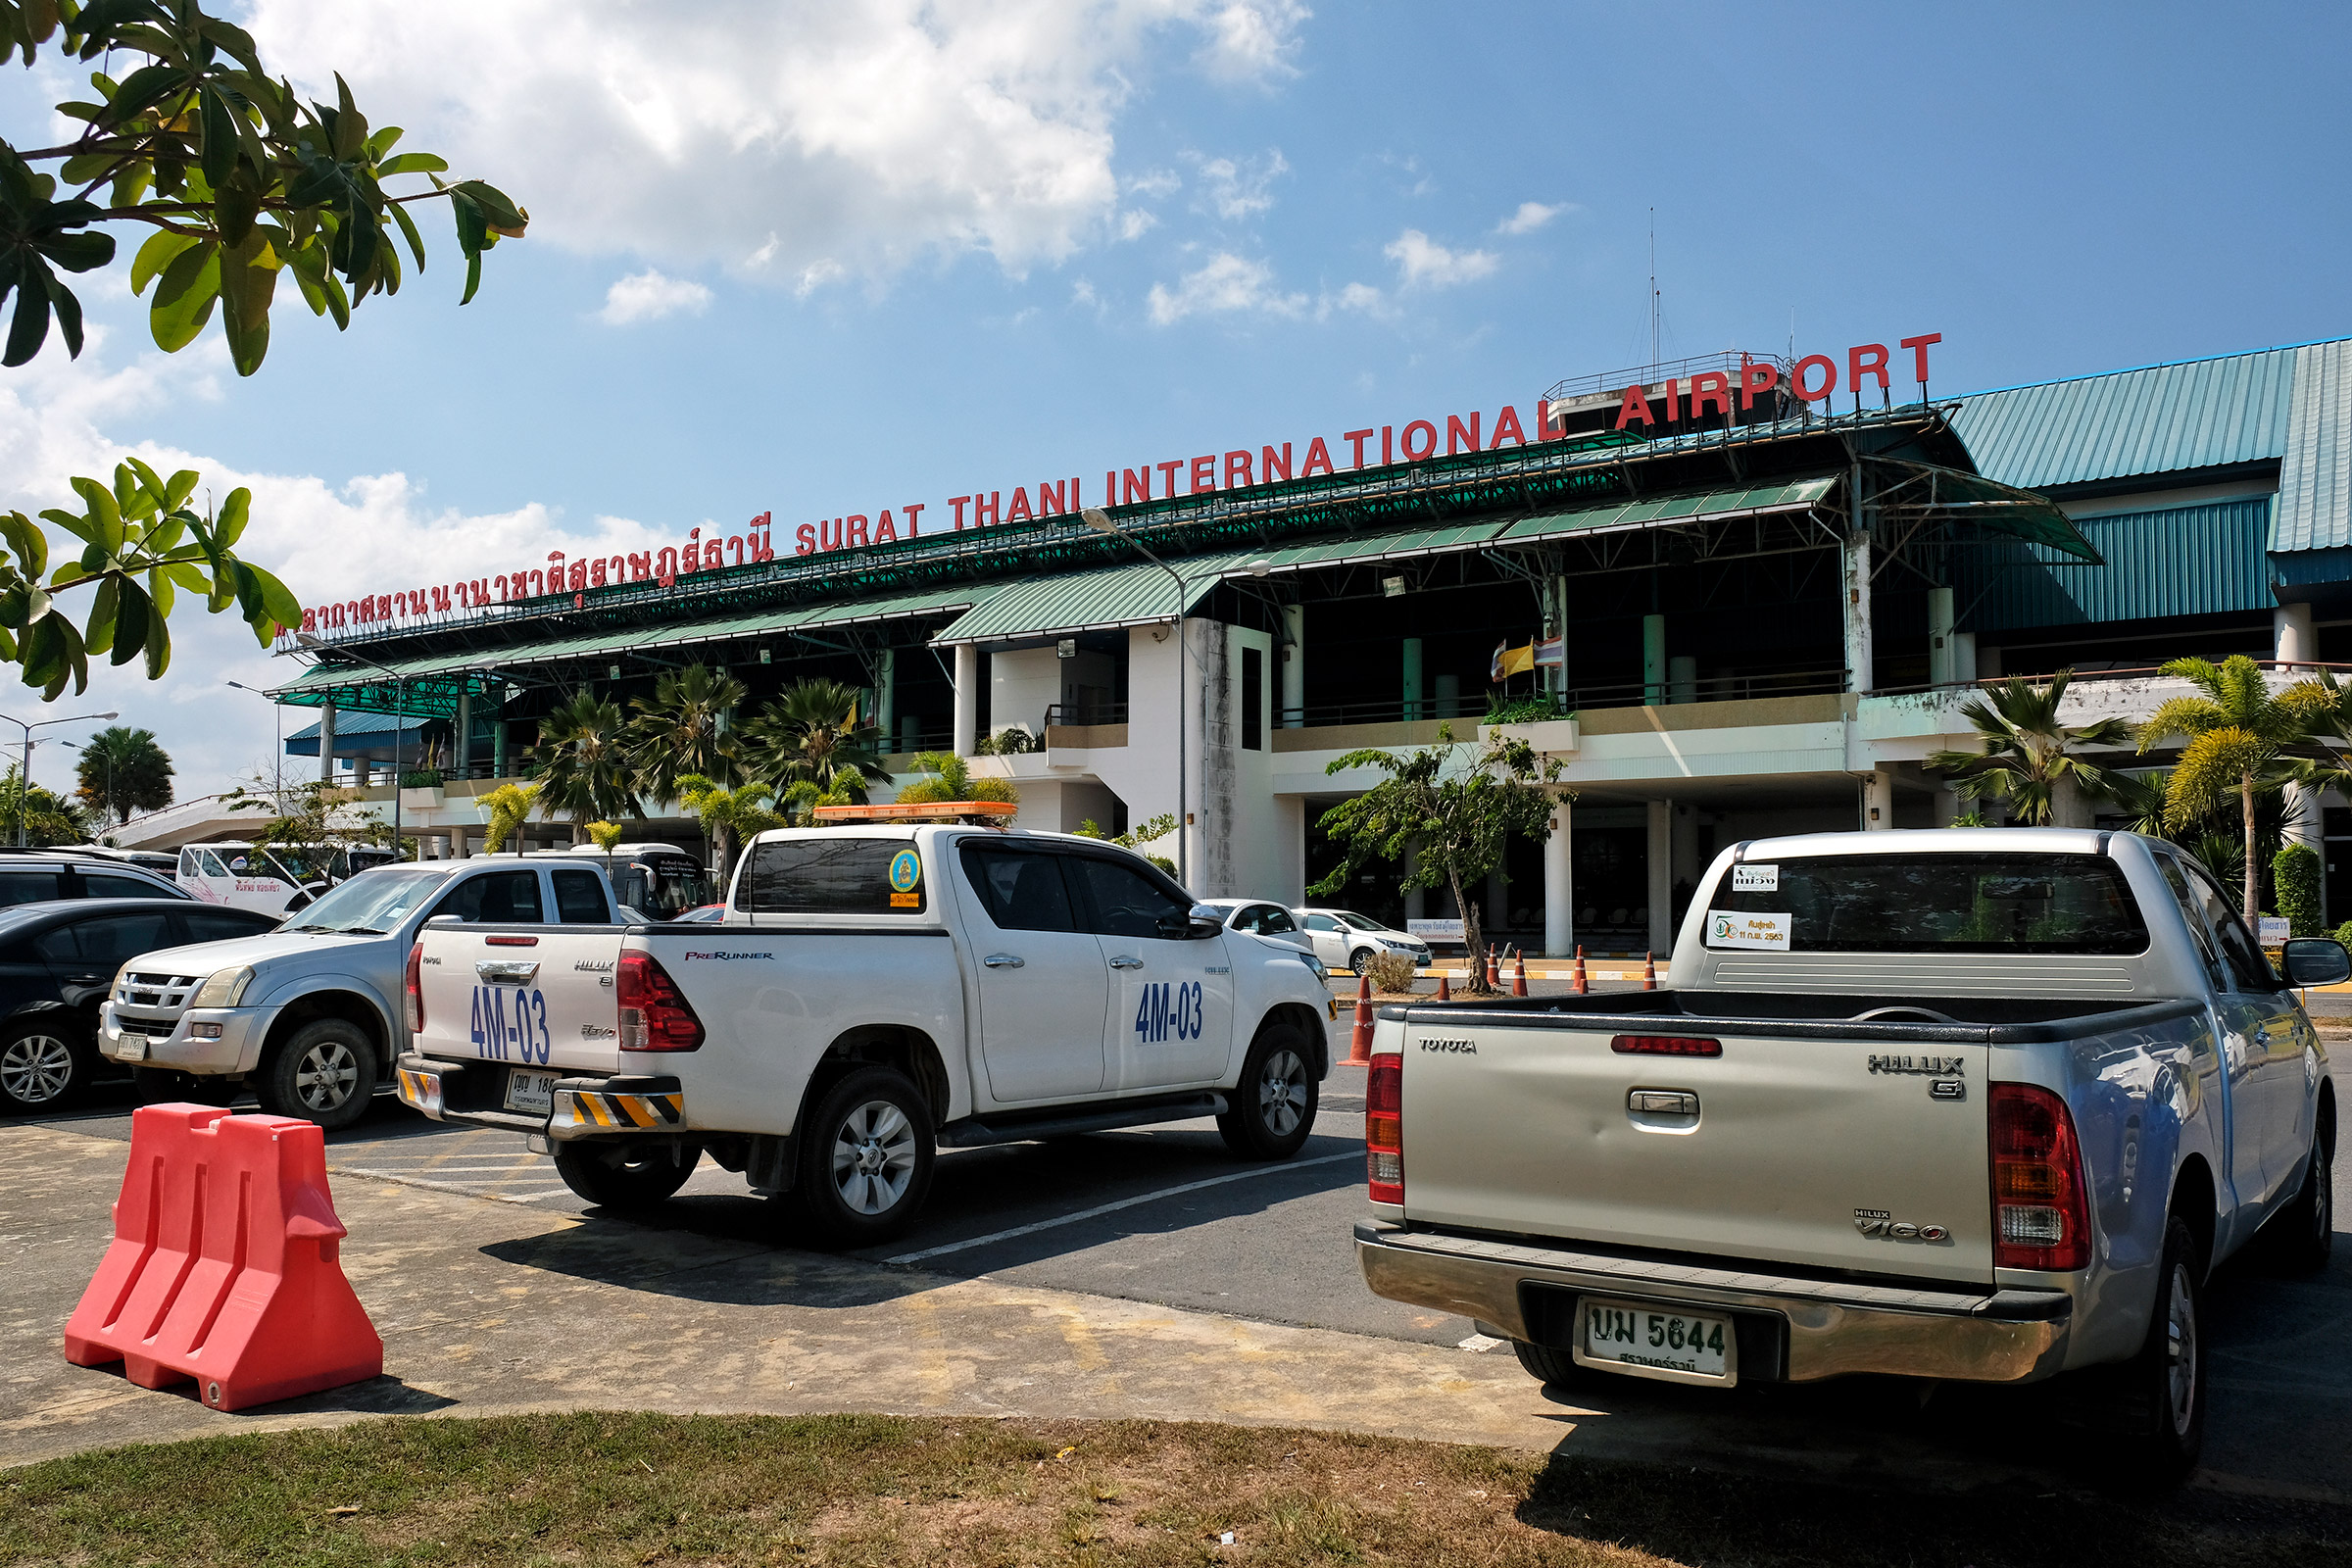 Surat Thani airport - the closest airport to Khao Sok